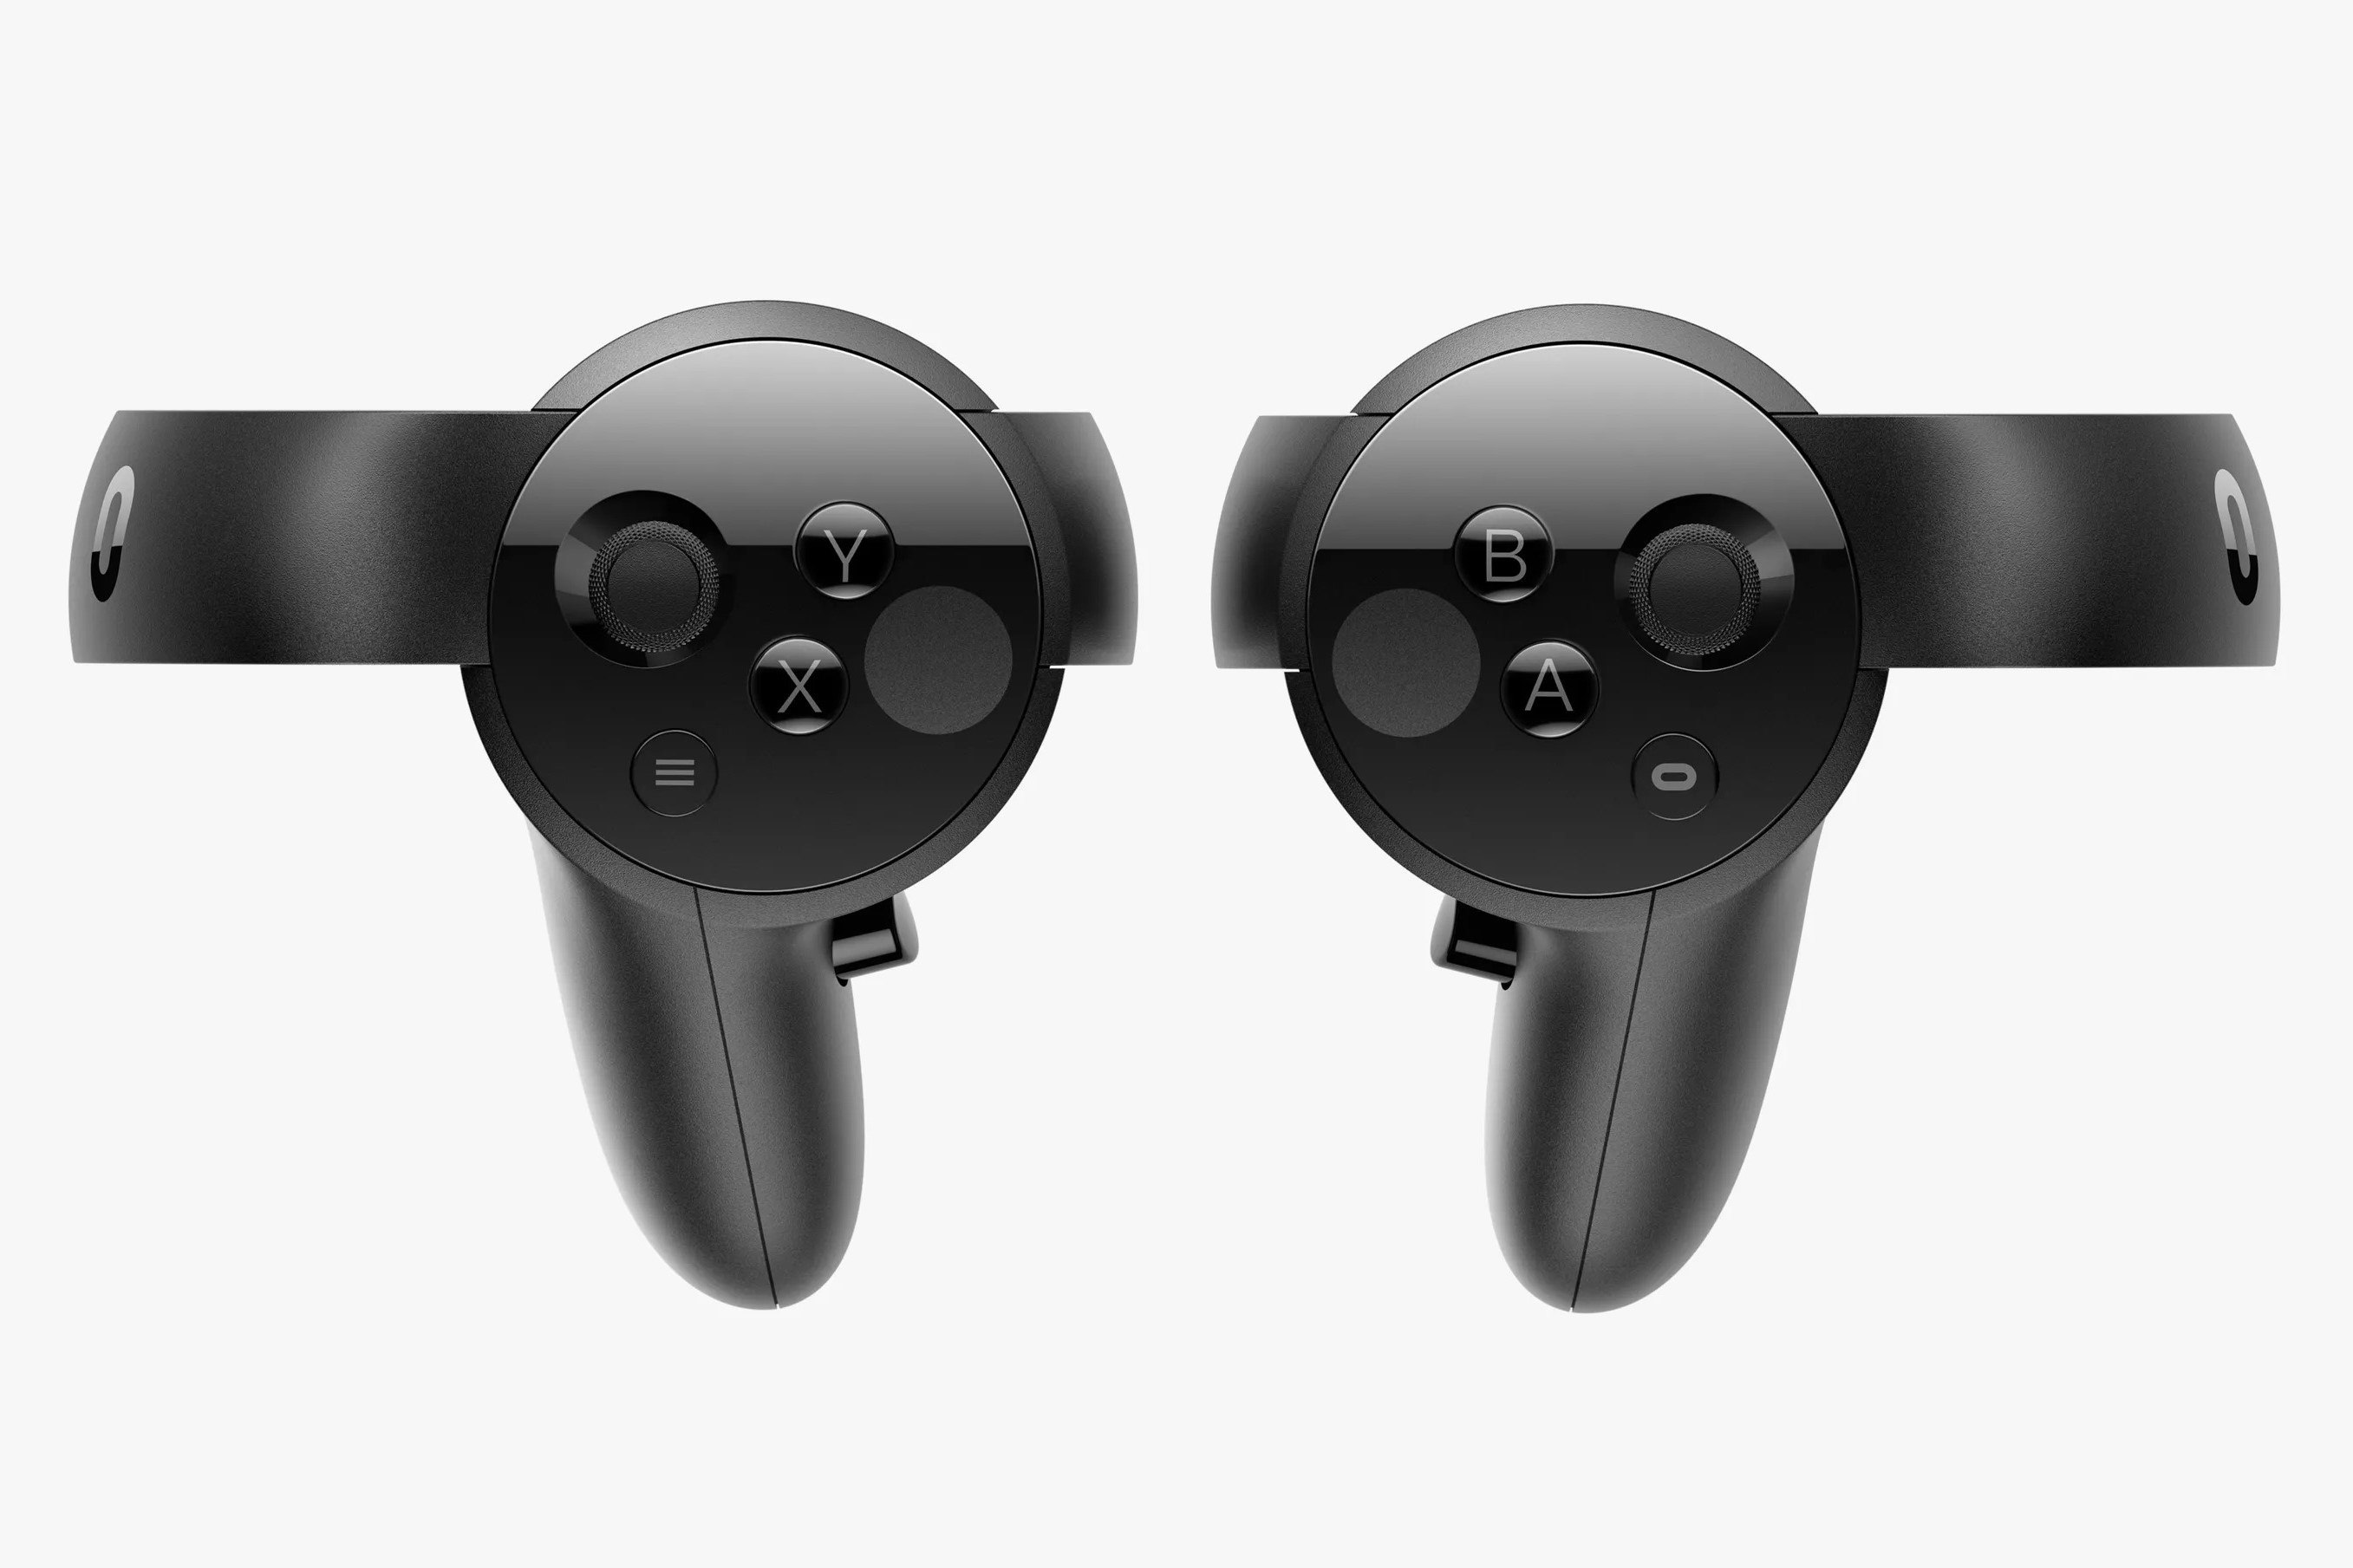 Which Is The Oculus Rift S Select Button